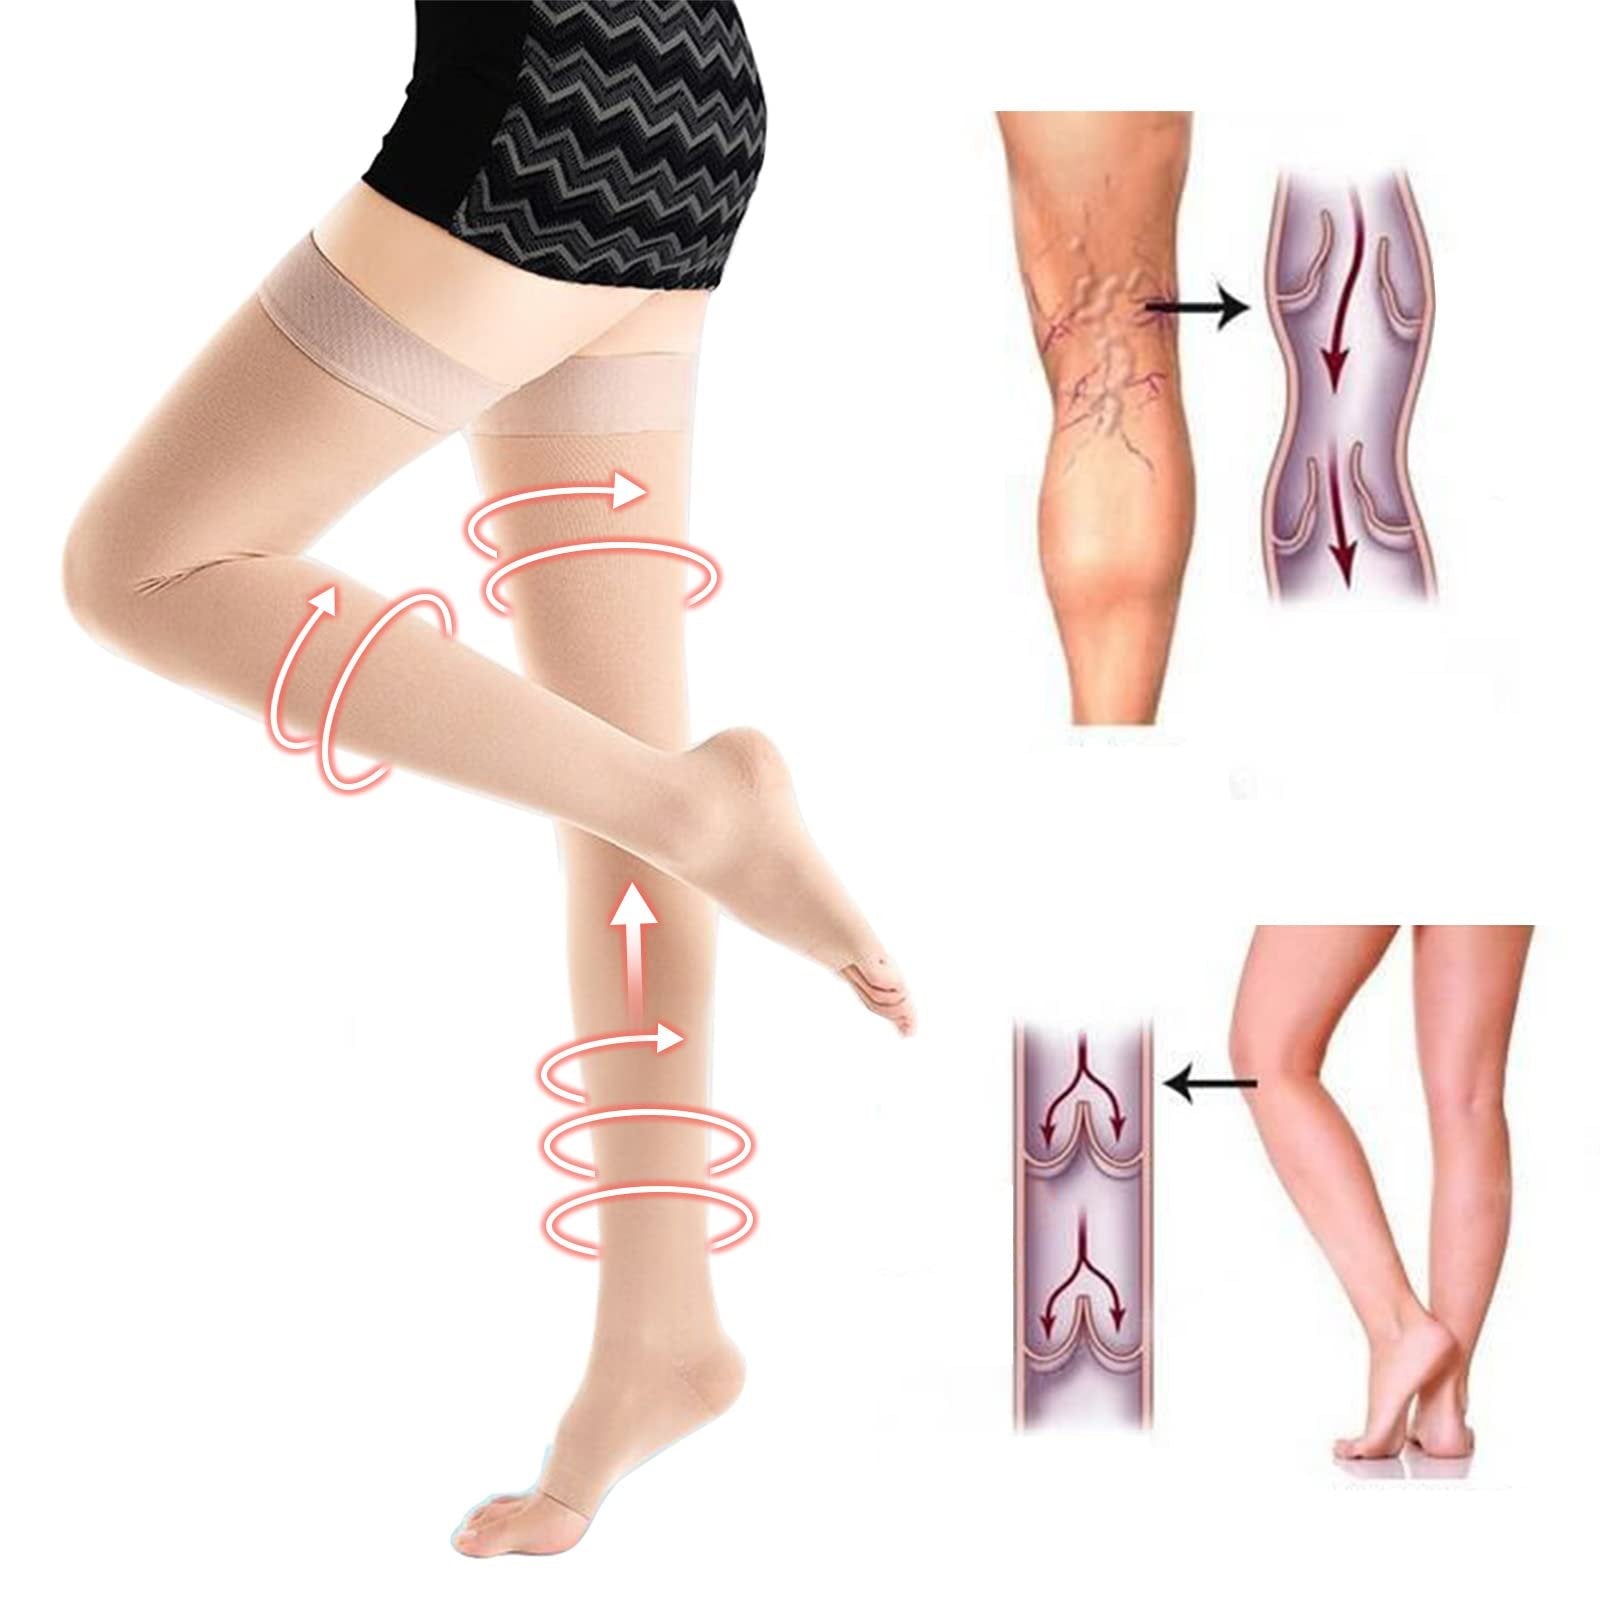 Compression Pantyhose for Women Medical 20-30 mmhg Support Stockings  Gradient Tights for Varicose Veins Edema Swelling, Black, Large price in  Saudi Arabia,  Saudi Arabia